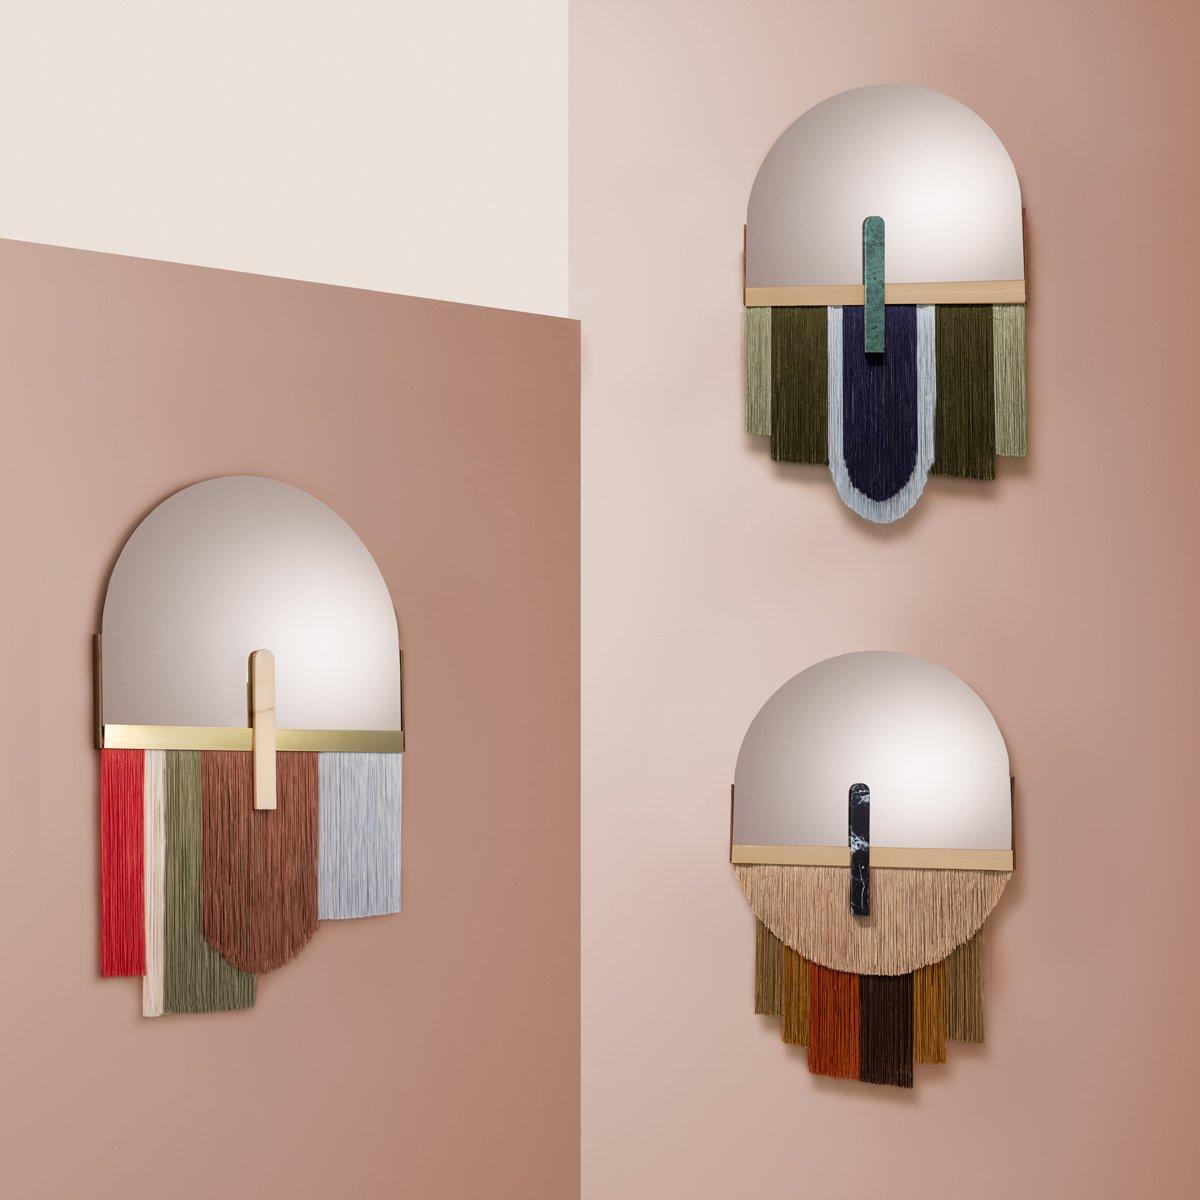 Ensemble of Three Colorful Wall Mirrors by Dooq 2